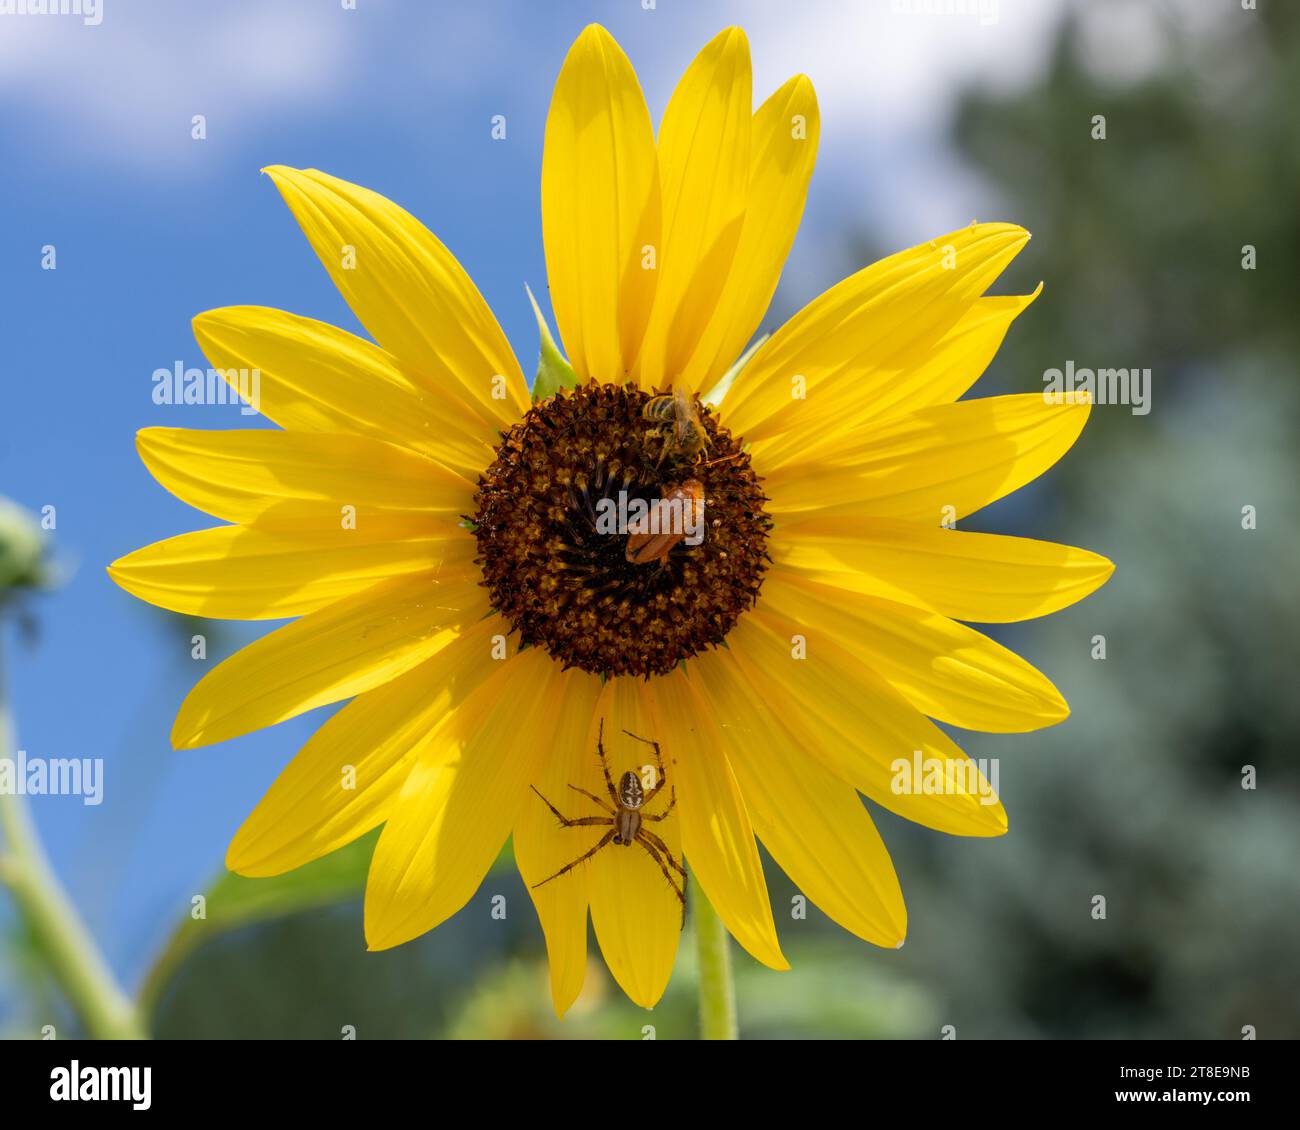 A Western Spotted Orbweaver, a Two-spotted Miner Bee & a blister beetle on a Common Sunflower. Stock Photo